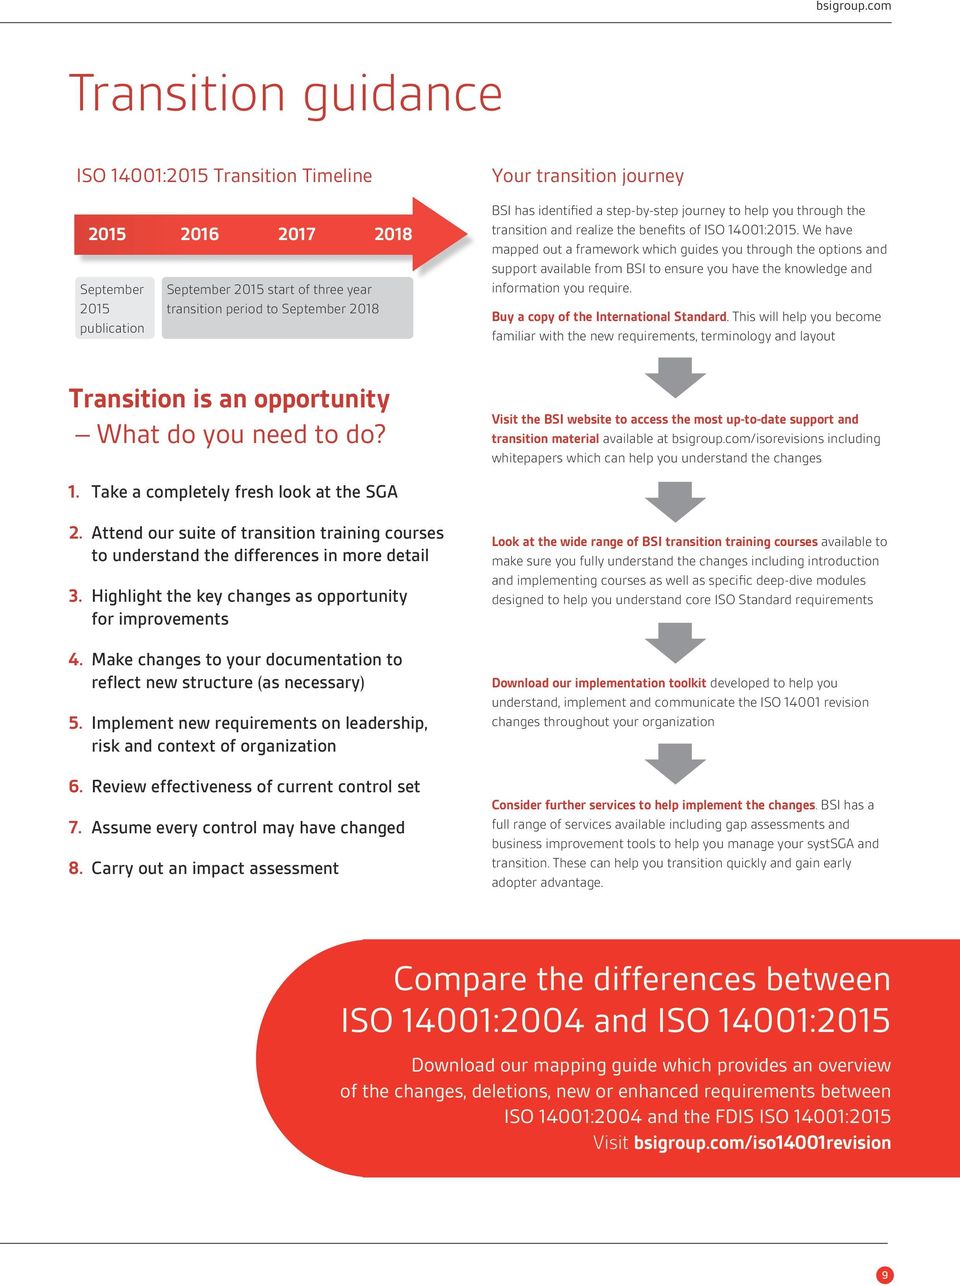 journey BSI has identified a step-by-step journey to help you through the transition and realize the benefits of ISO 14001:2015.